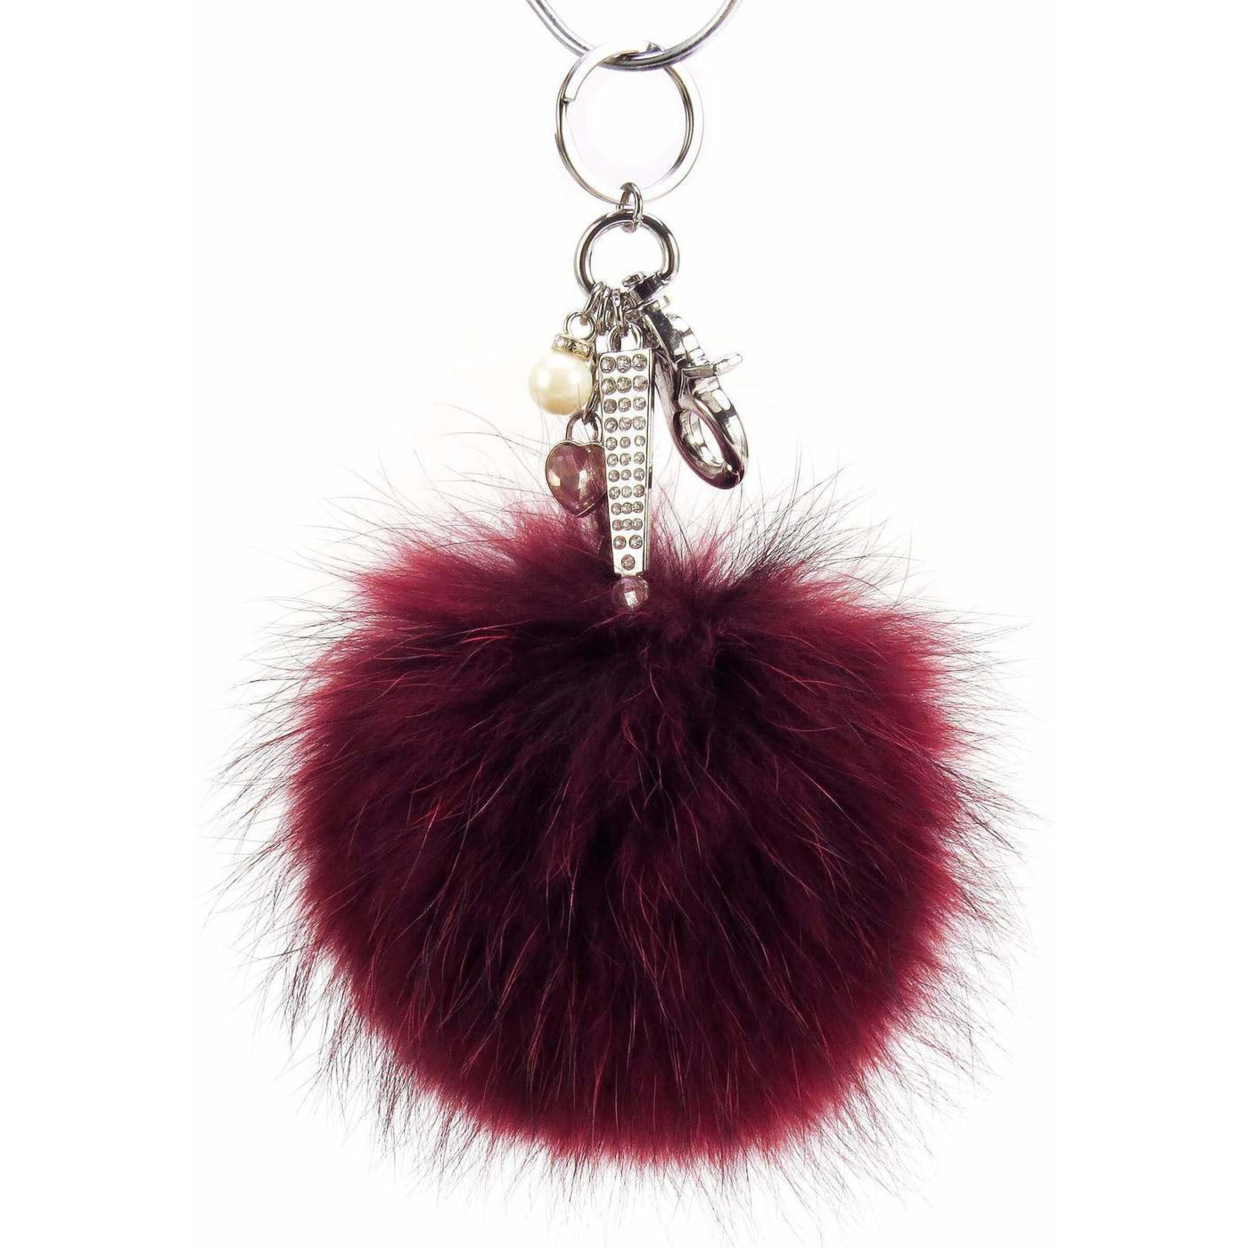 Real Fur Puff Ball Pom-Pom 6 Accessory Dangle Purse Charm - Maroon With Silver Hardware